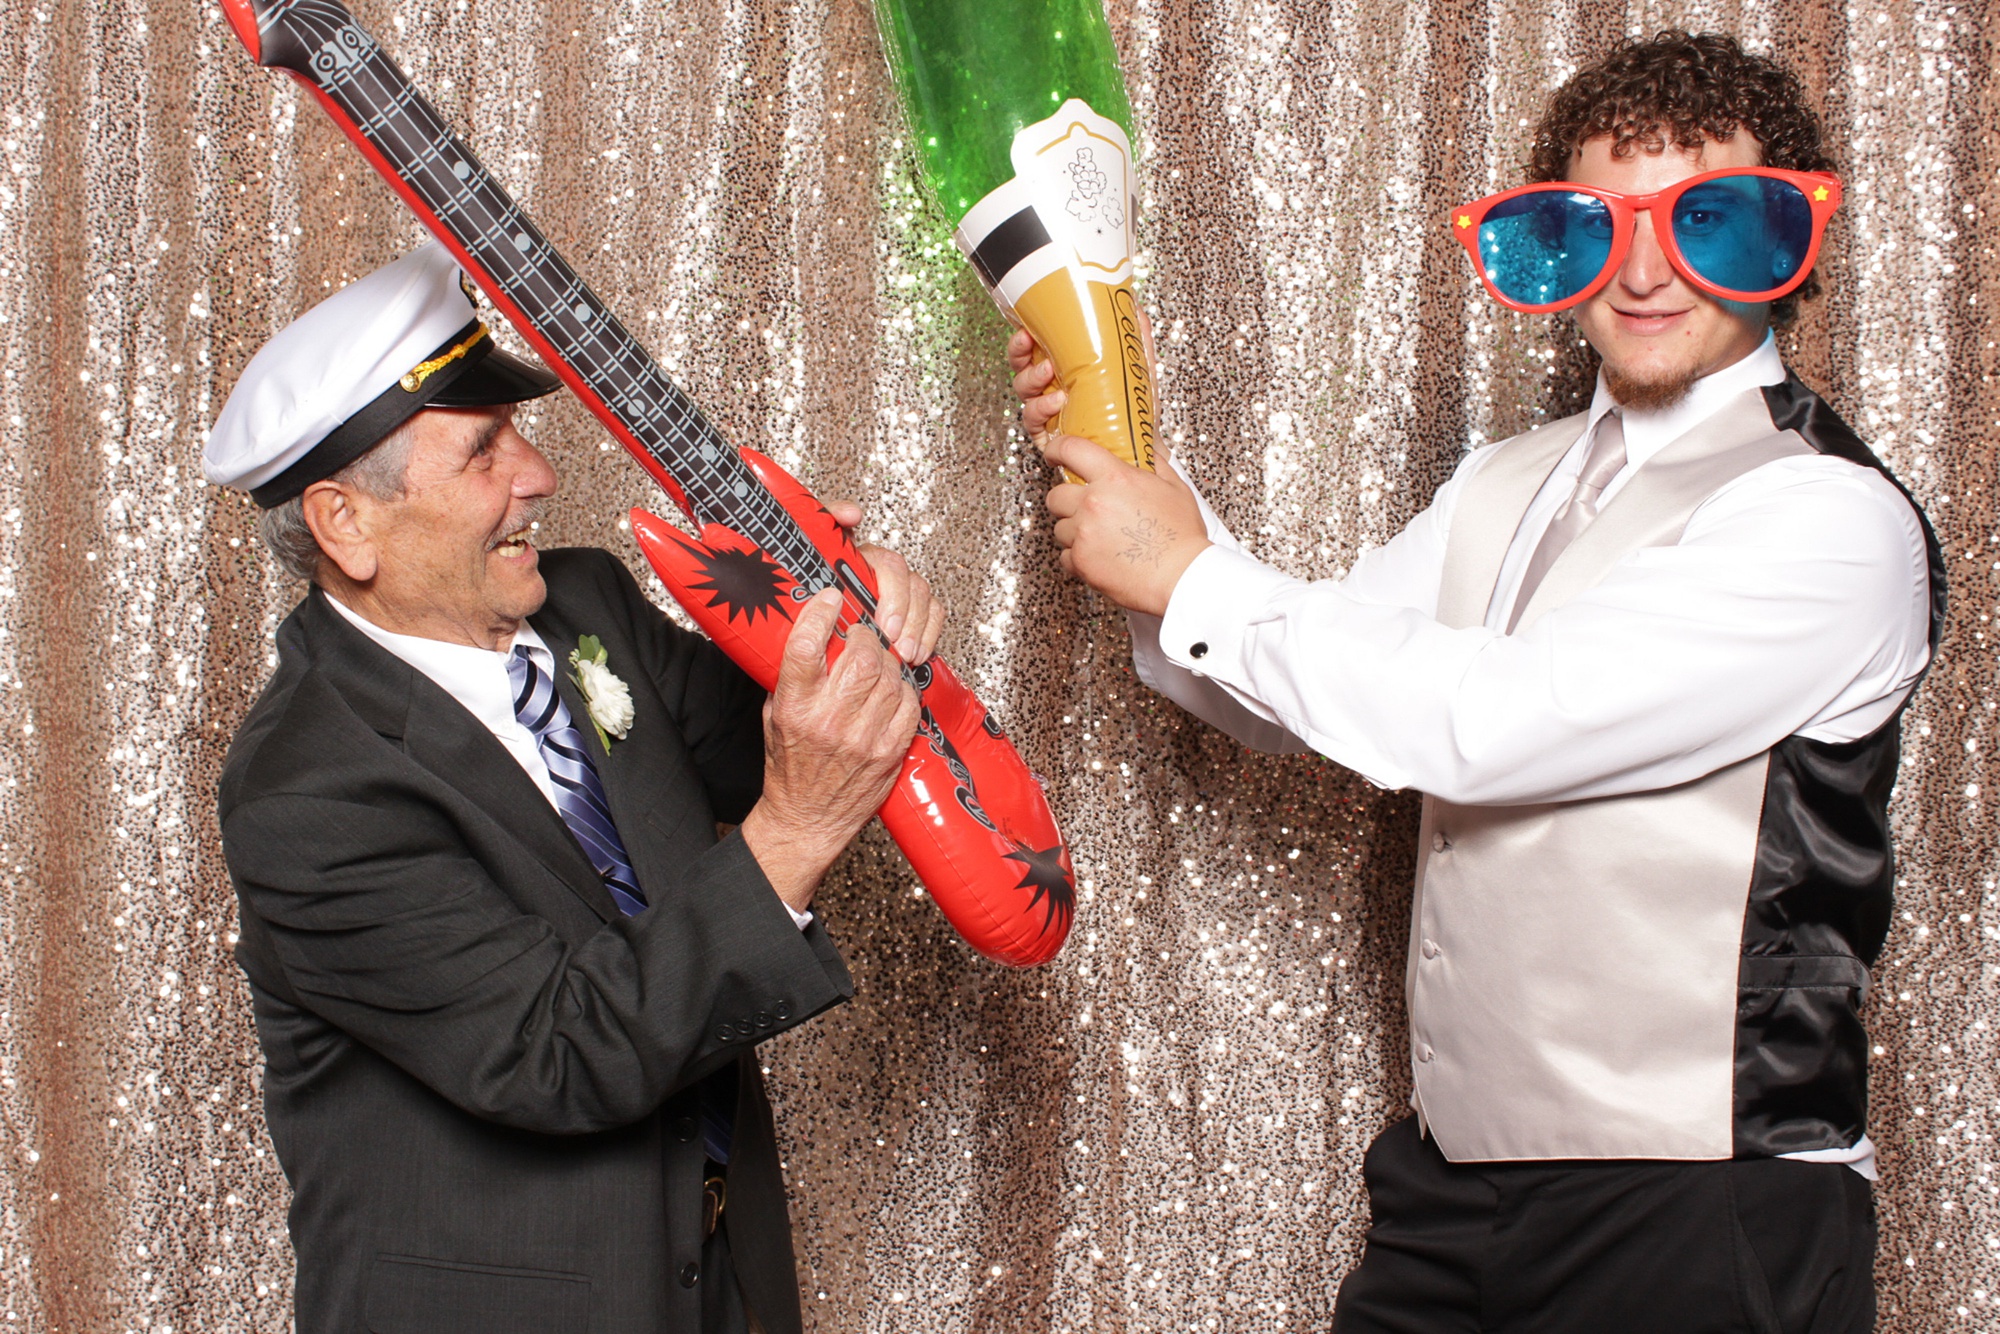 guys battle with inflatable props during NJ photo booth